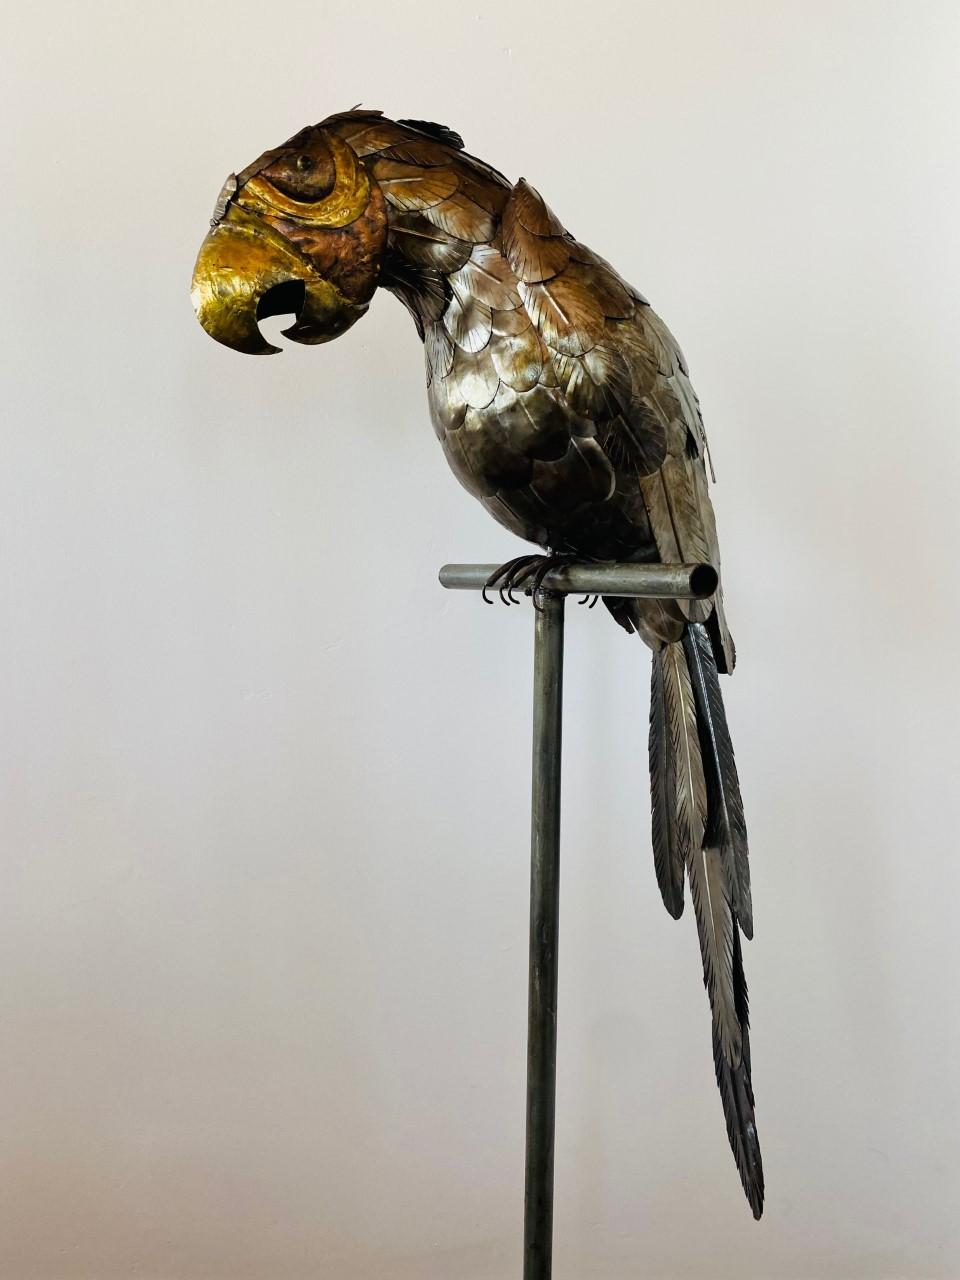 Sculptural Parrot bird on metal perch, made of mixed metals (copper, brass). This 1970s piece follows the style of Sergio Bustamante. The mix of metals adds vibrancy and depth to the form and the details on the feathering and expressions allude to